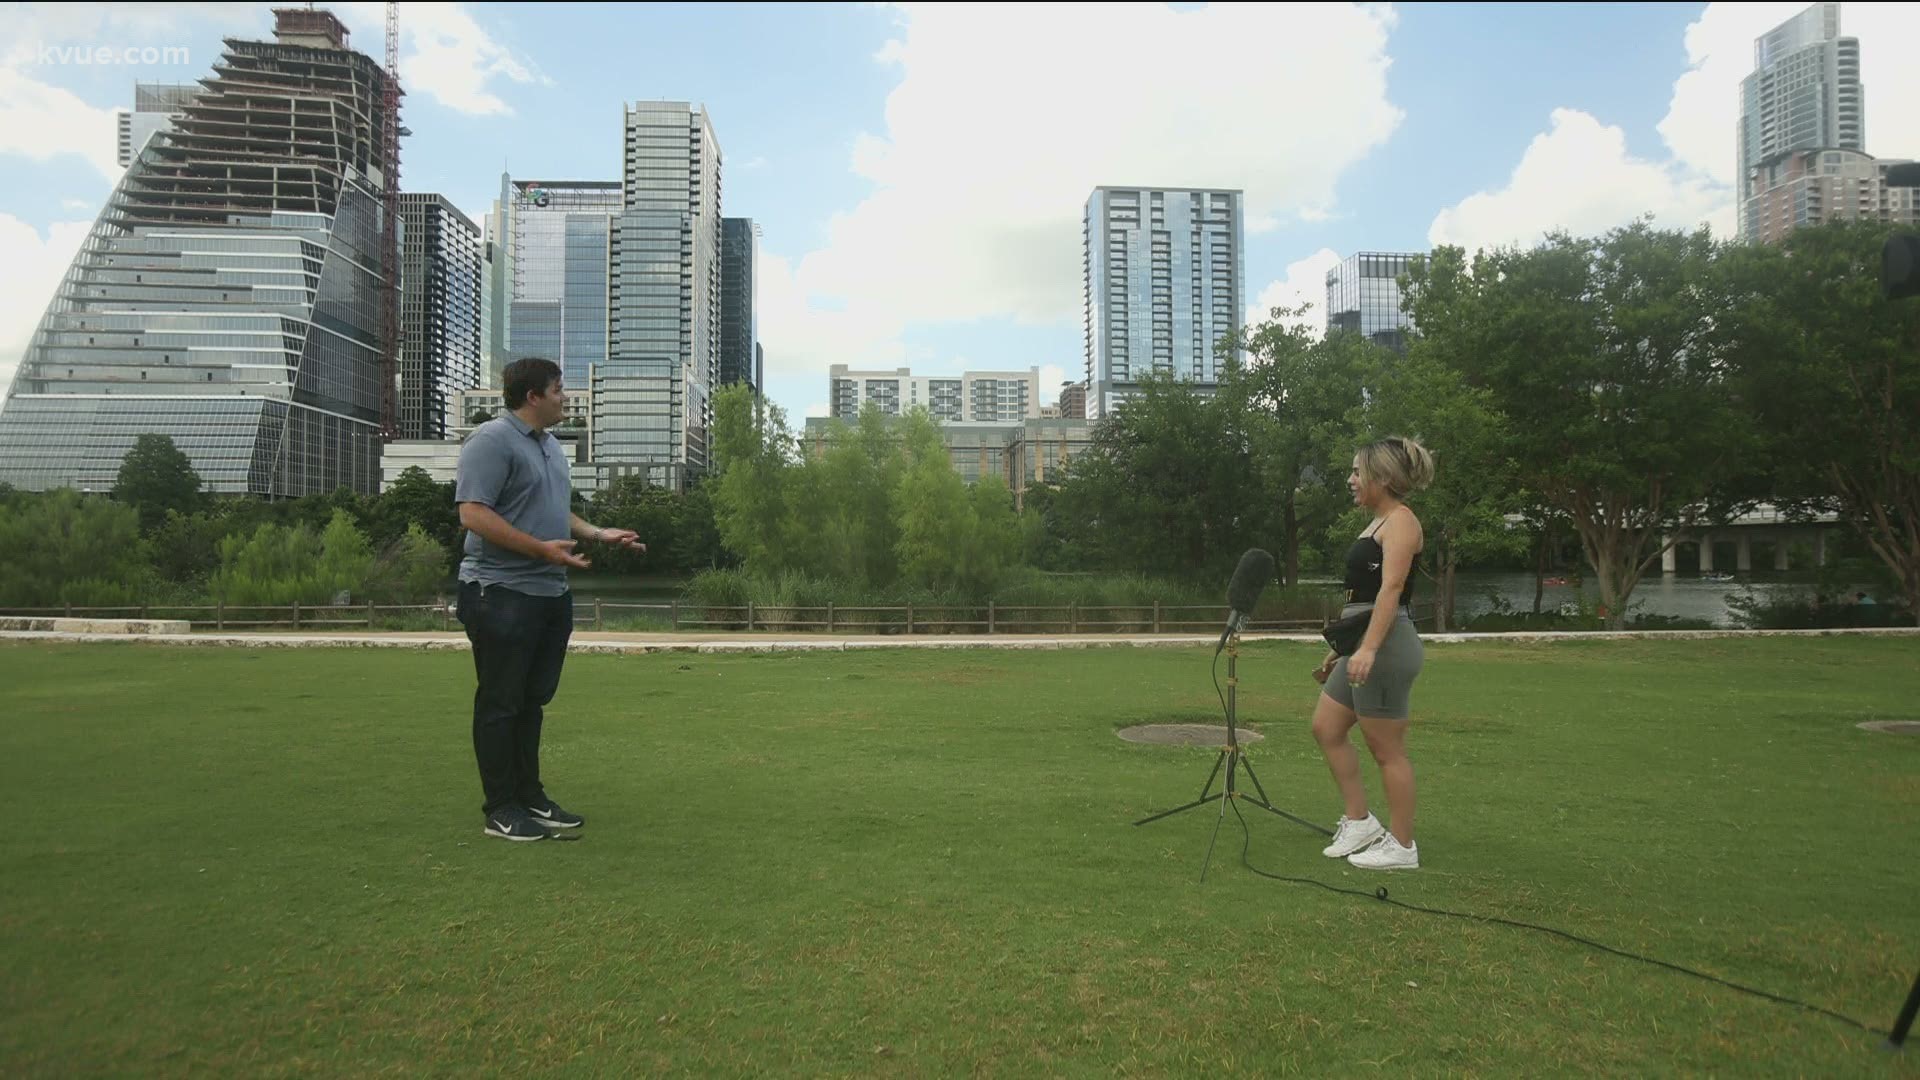 Each week we try to share some good news on KVUE. This week, Hank Cavagnaro went to Auditorium Shores to ask people for their good news.